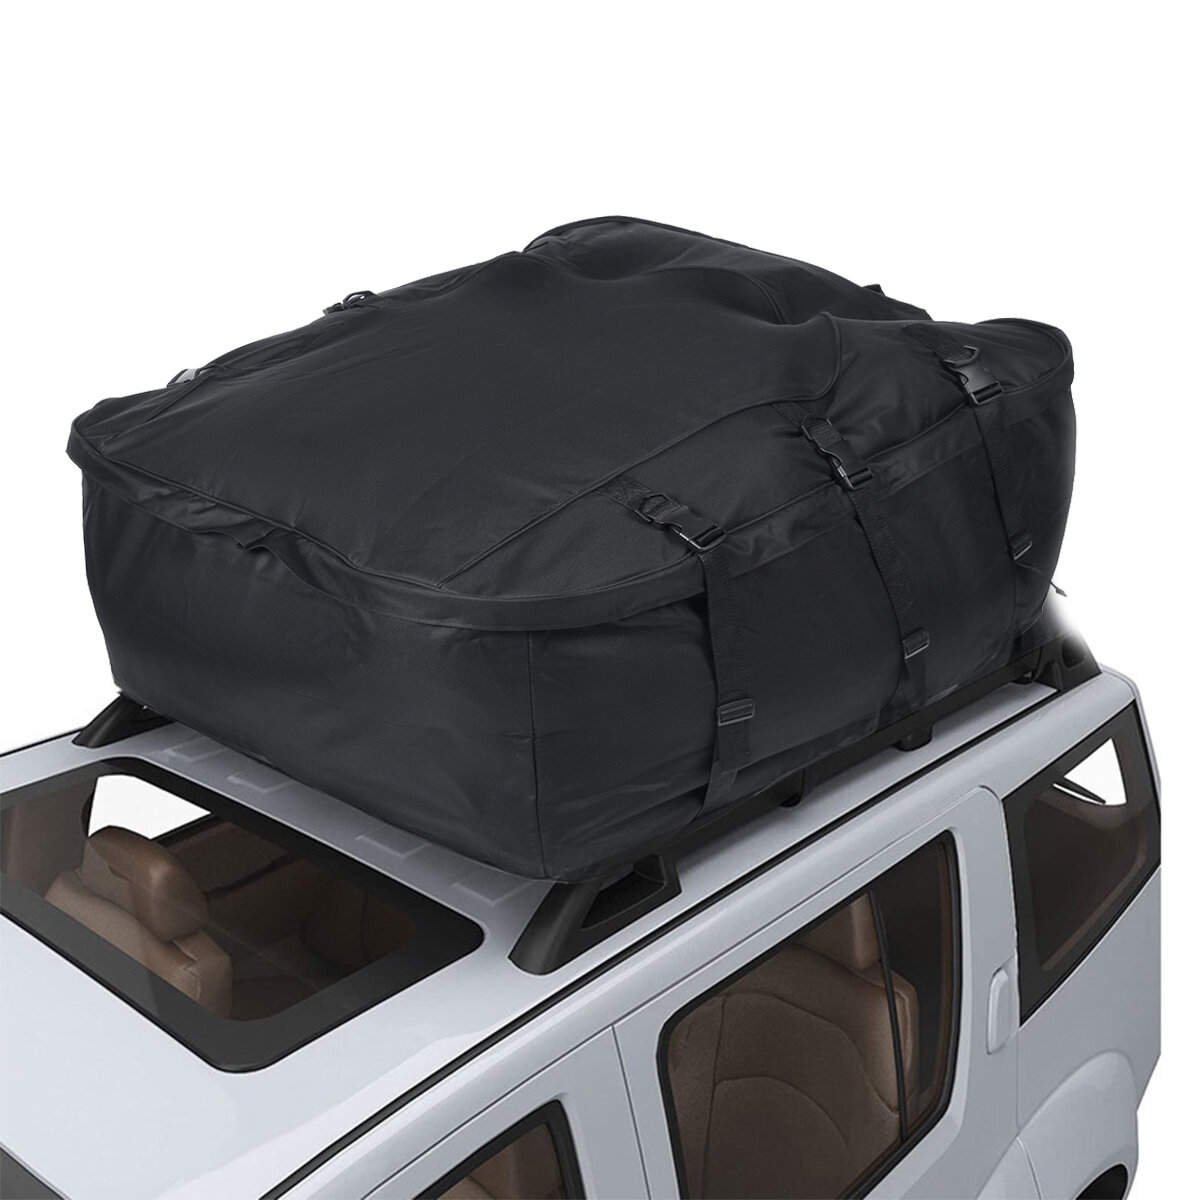 

Portable Travel Storage Bag Waterproof Car SUV Roof Top Rack Bag 600D Oxford Travel Luggage Storage Cargo Carrier 105*90